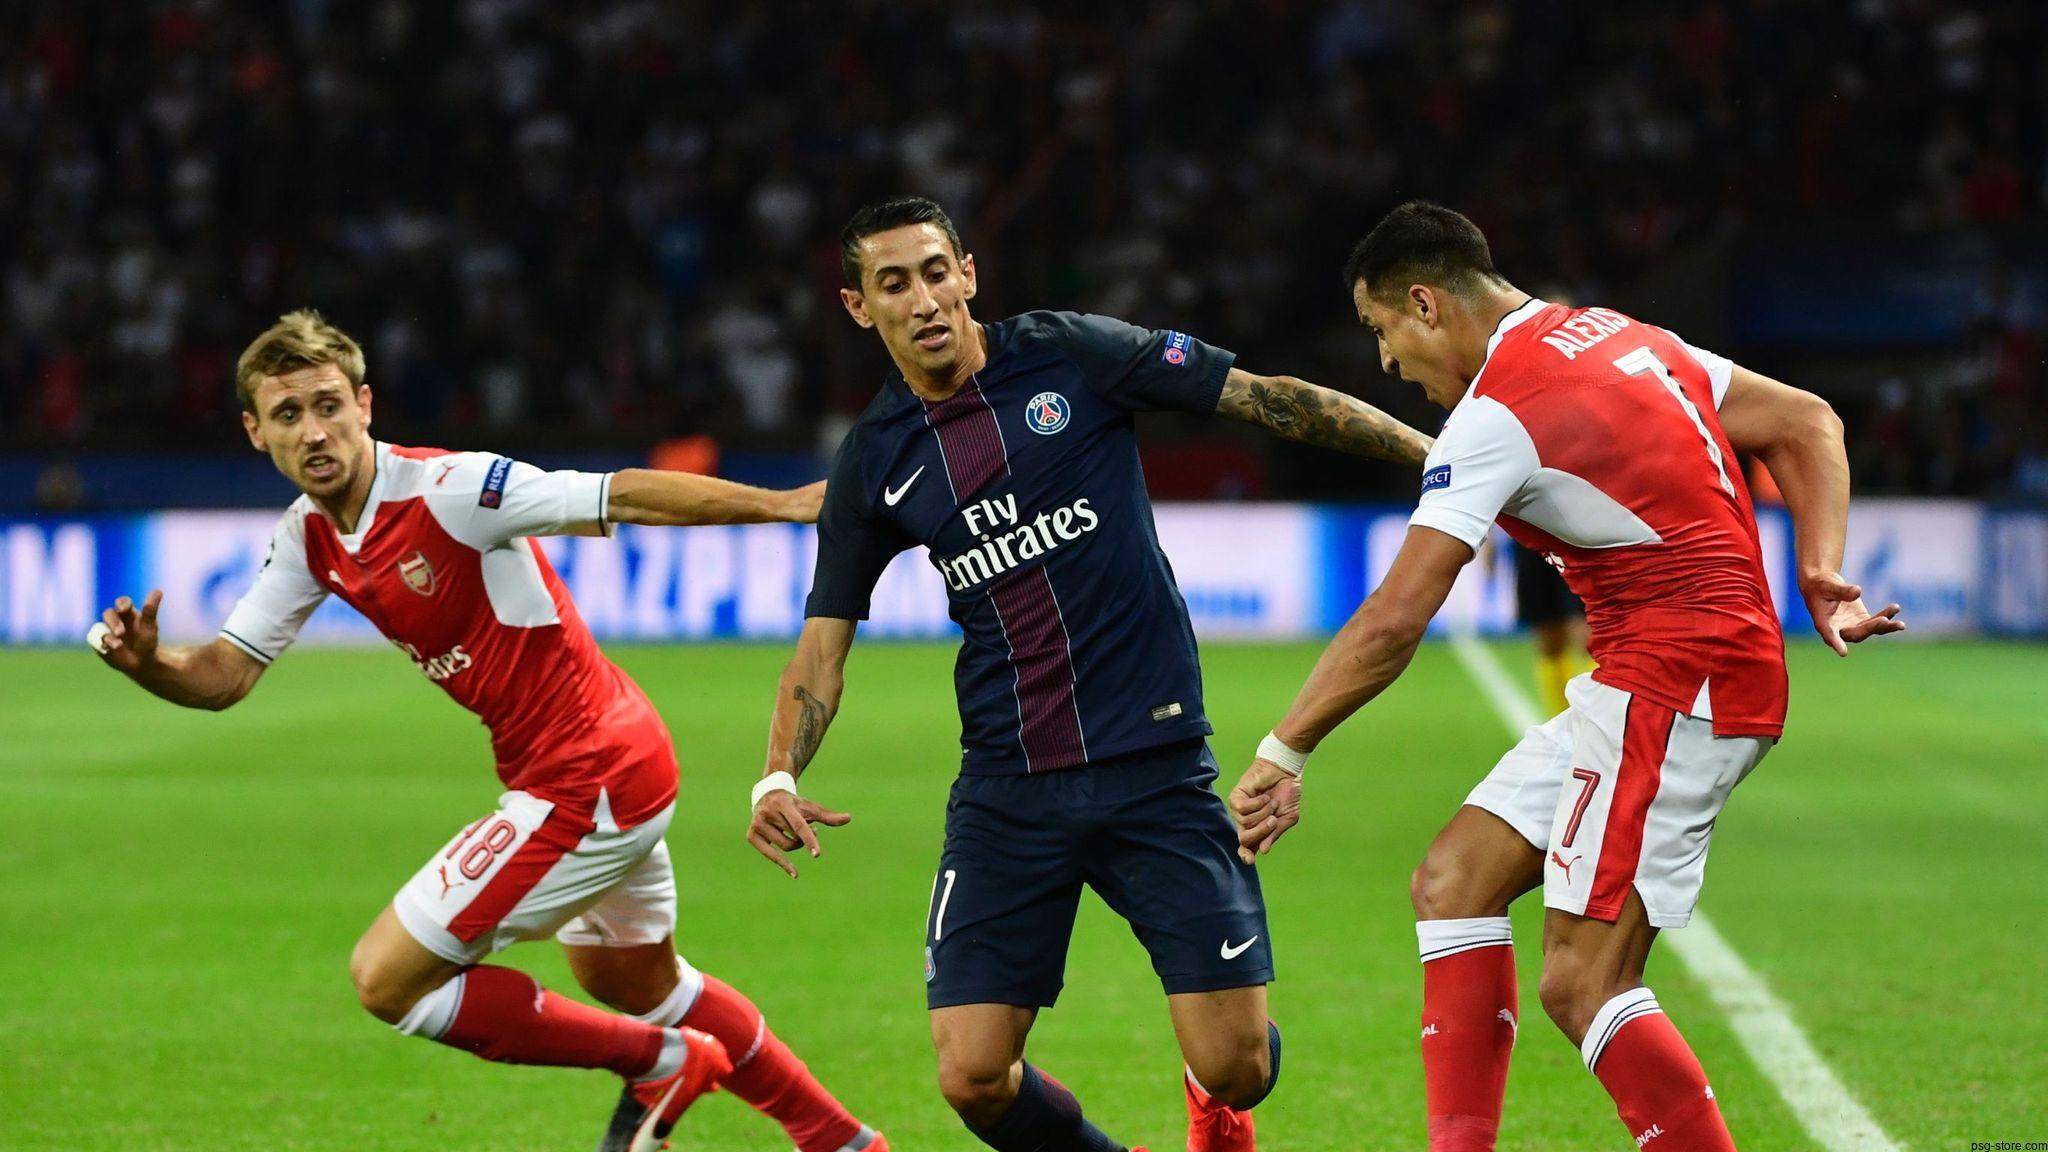 PSG and Arsenal went head-to-head: A classic battle